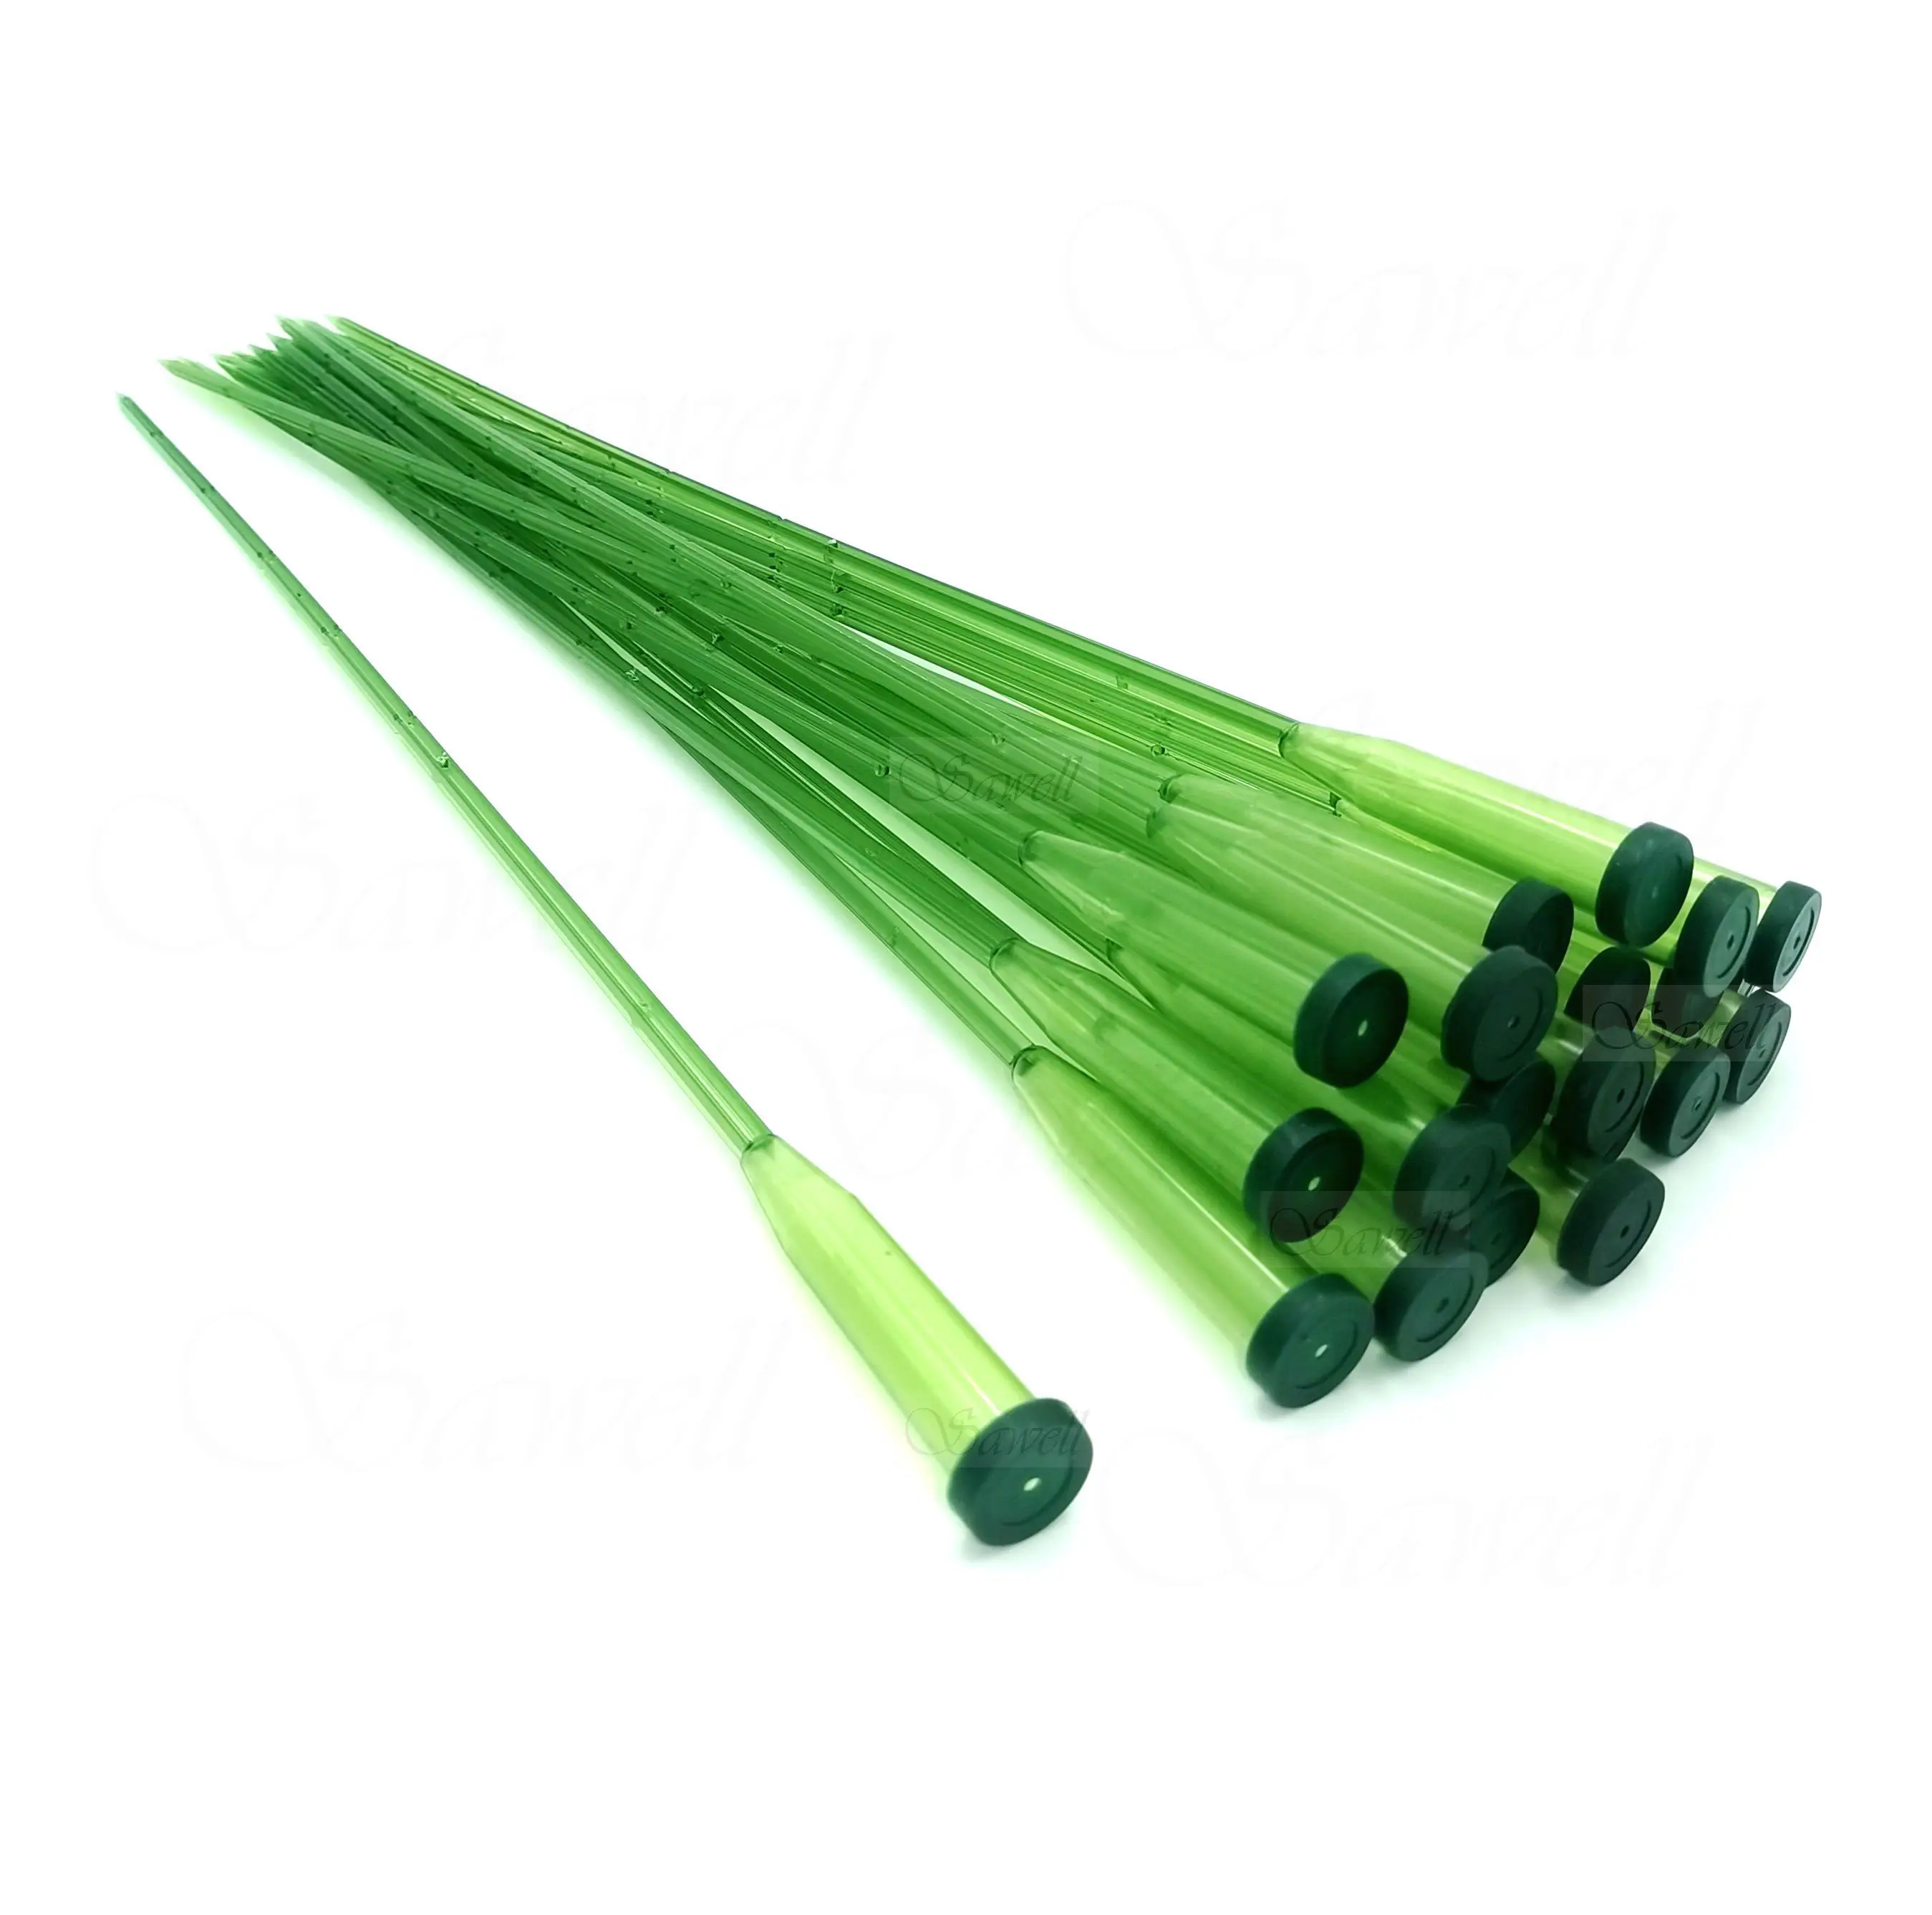 Floral Water Tubes with Pick/Vials for Flower Arrangements Box of 70, 5 Green Floral Supply Online Includes Rubber Cap with Hole for Flower stem. 